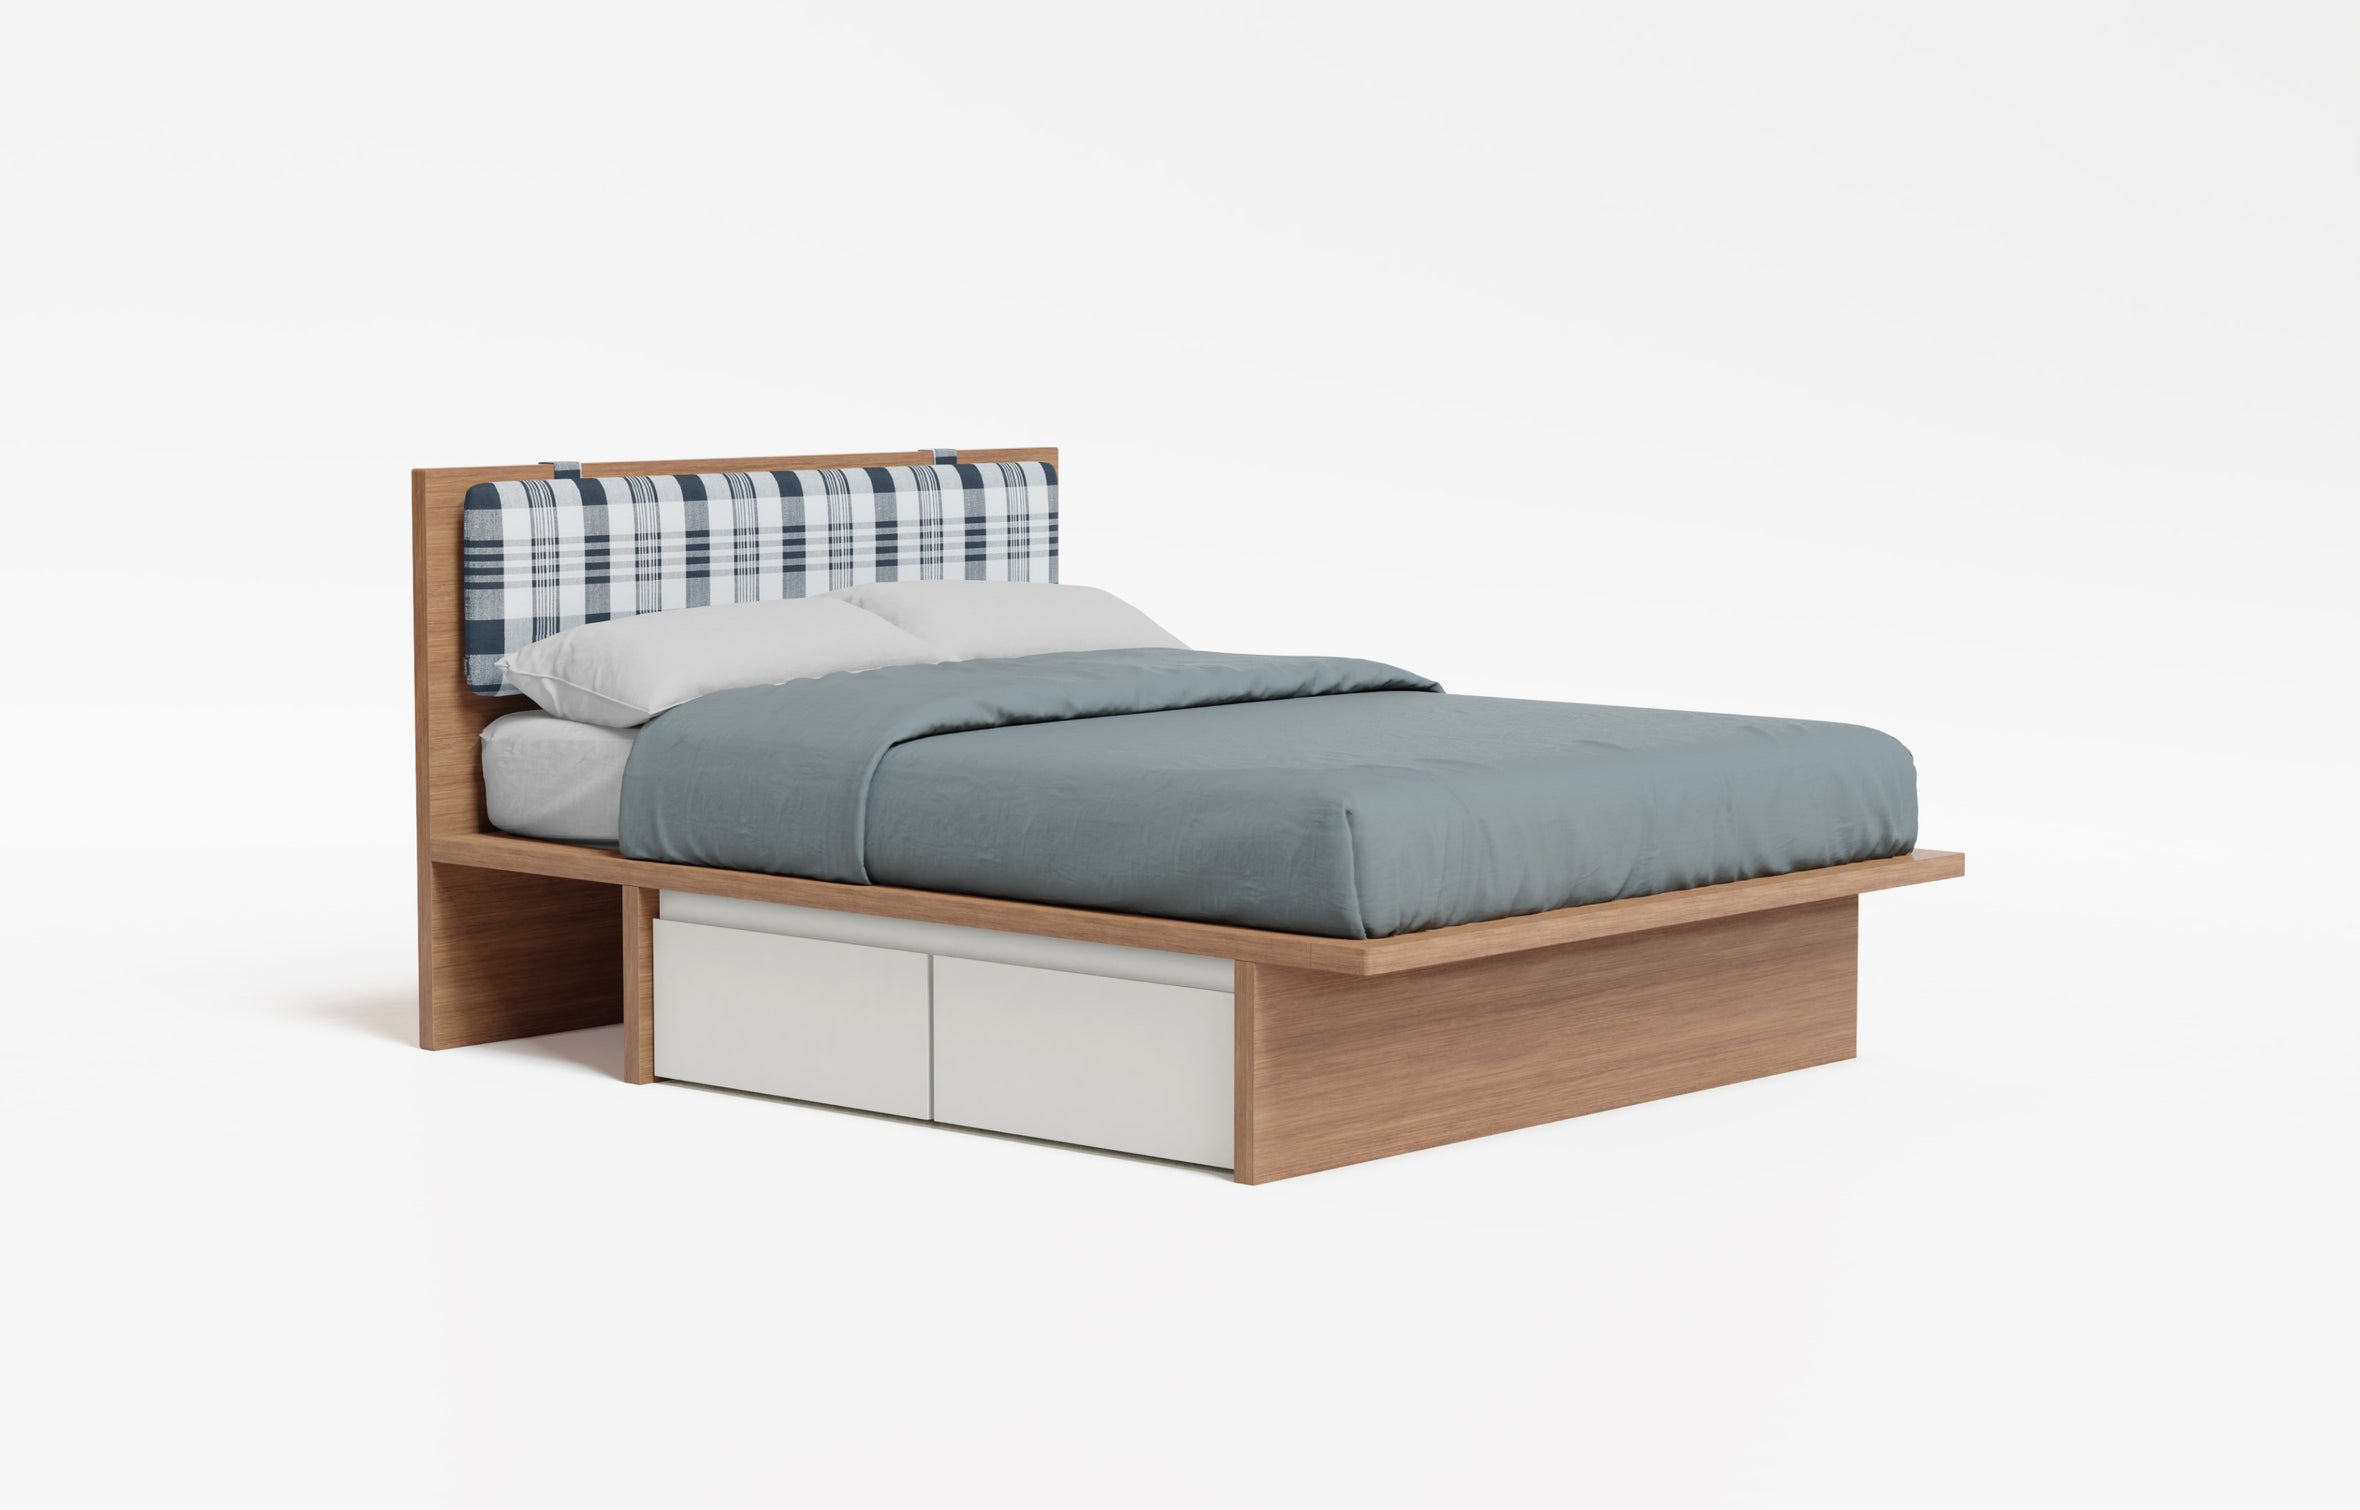 Bento wood storage bed | ff&e dorm furniture manufacturers | Roomy | Chicago